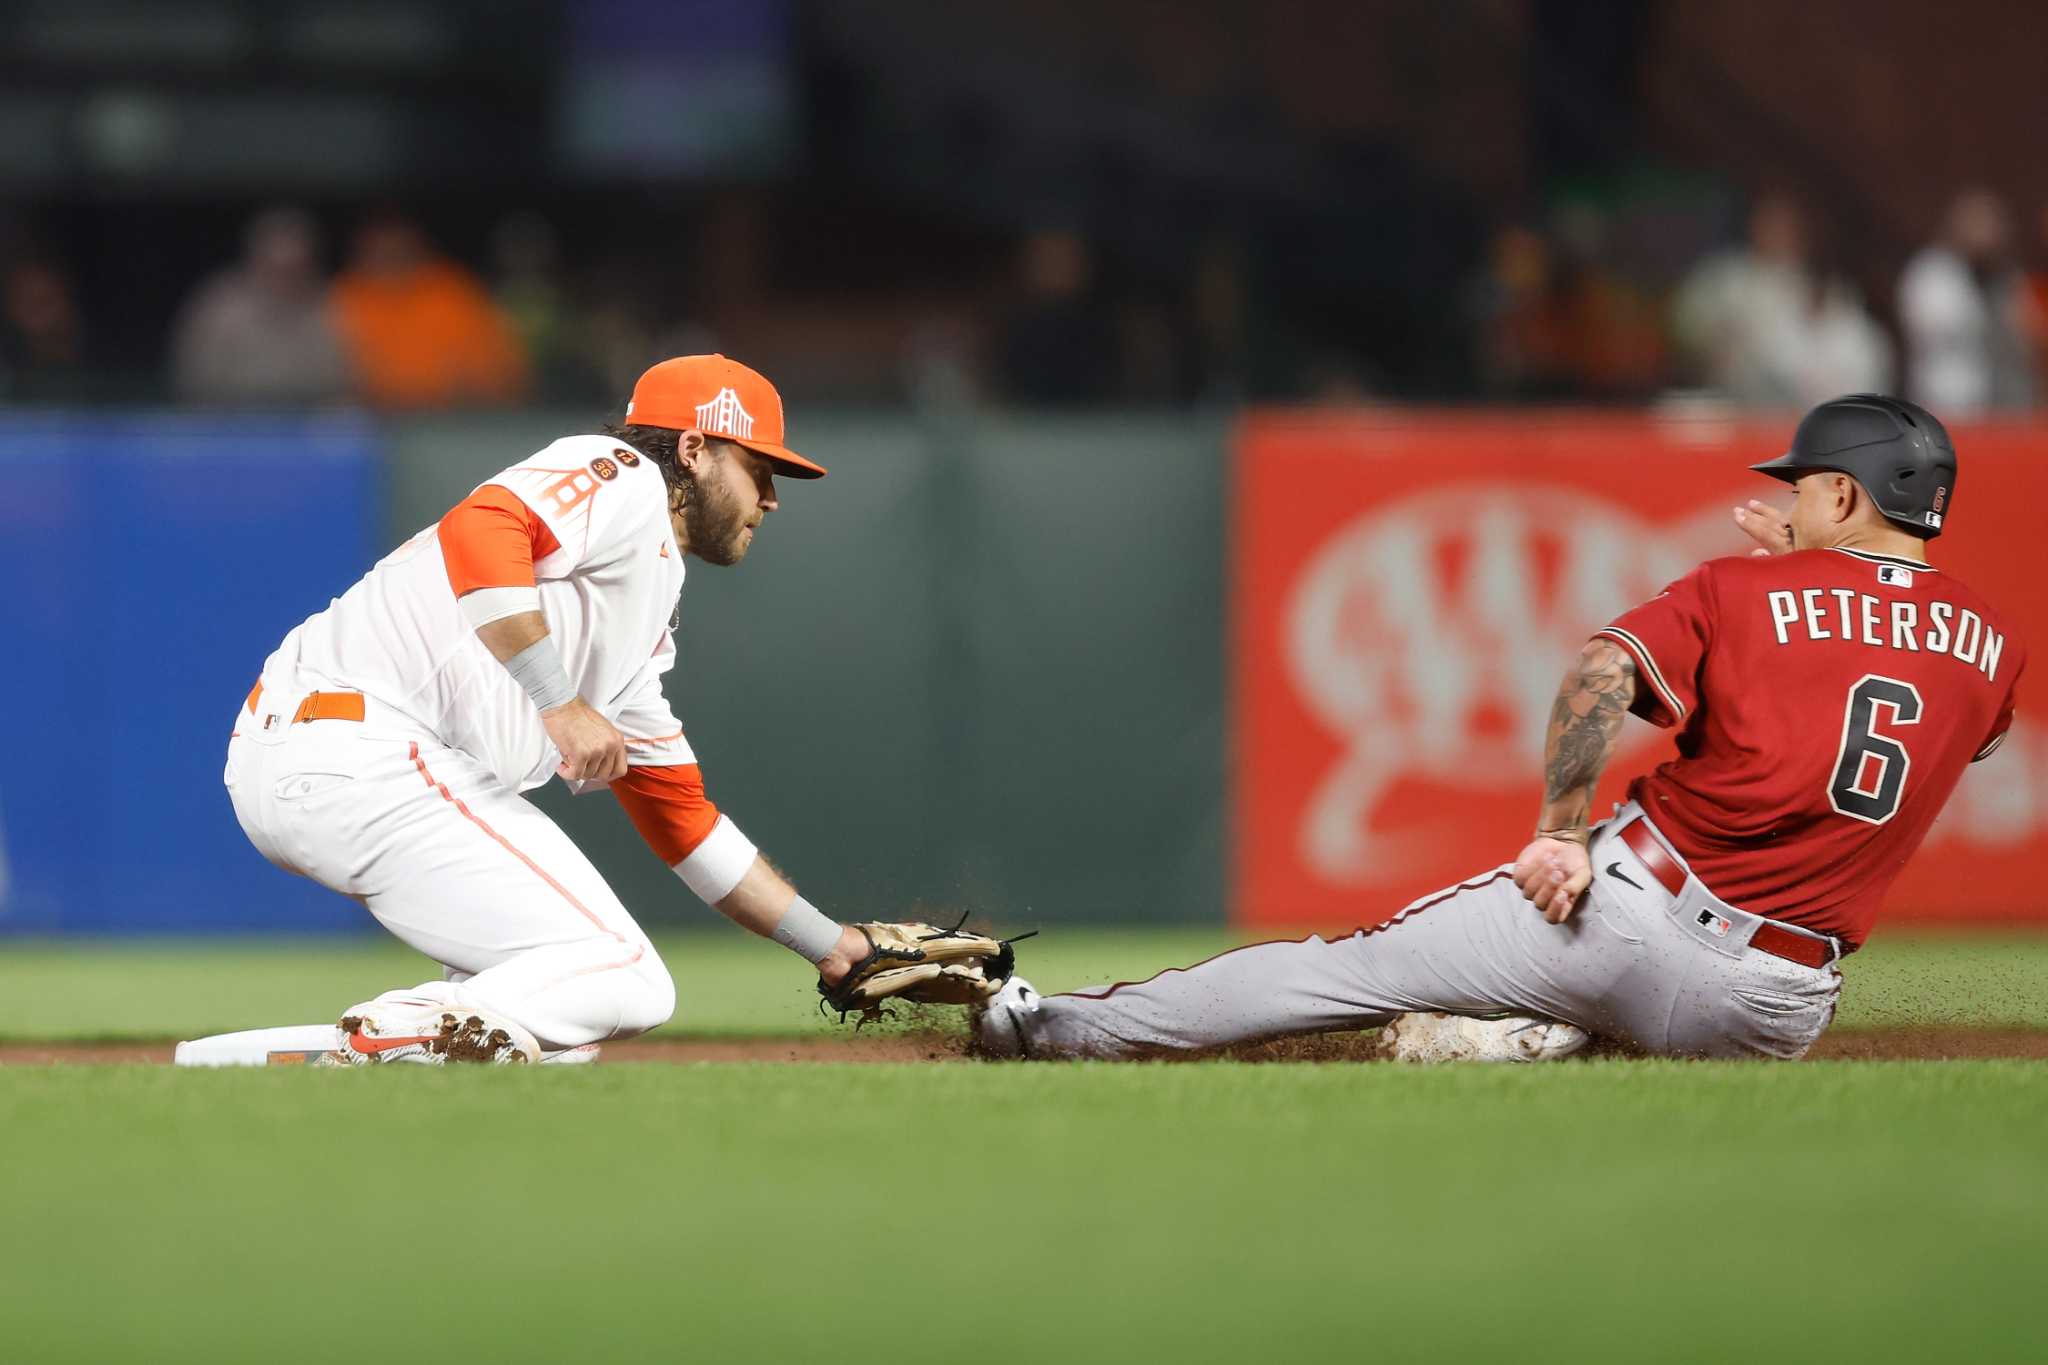 Cardinals allow big rally by Giants, blow chance for first win